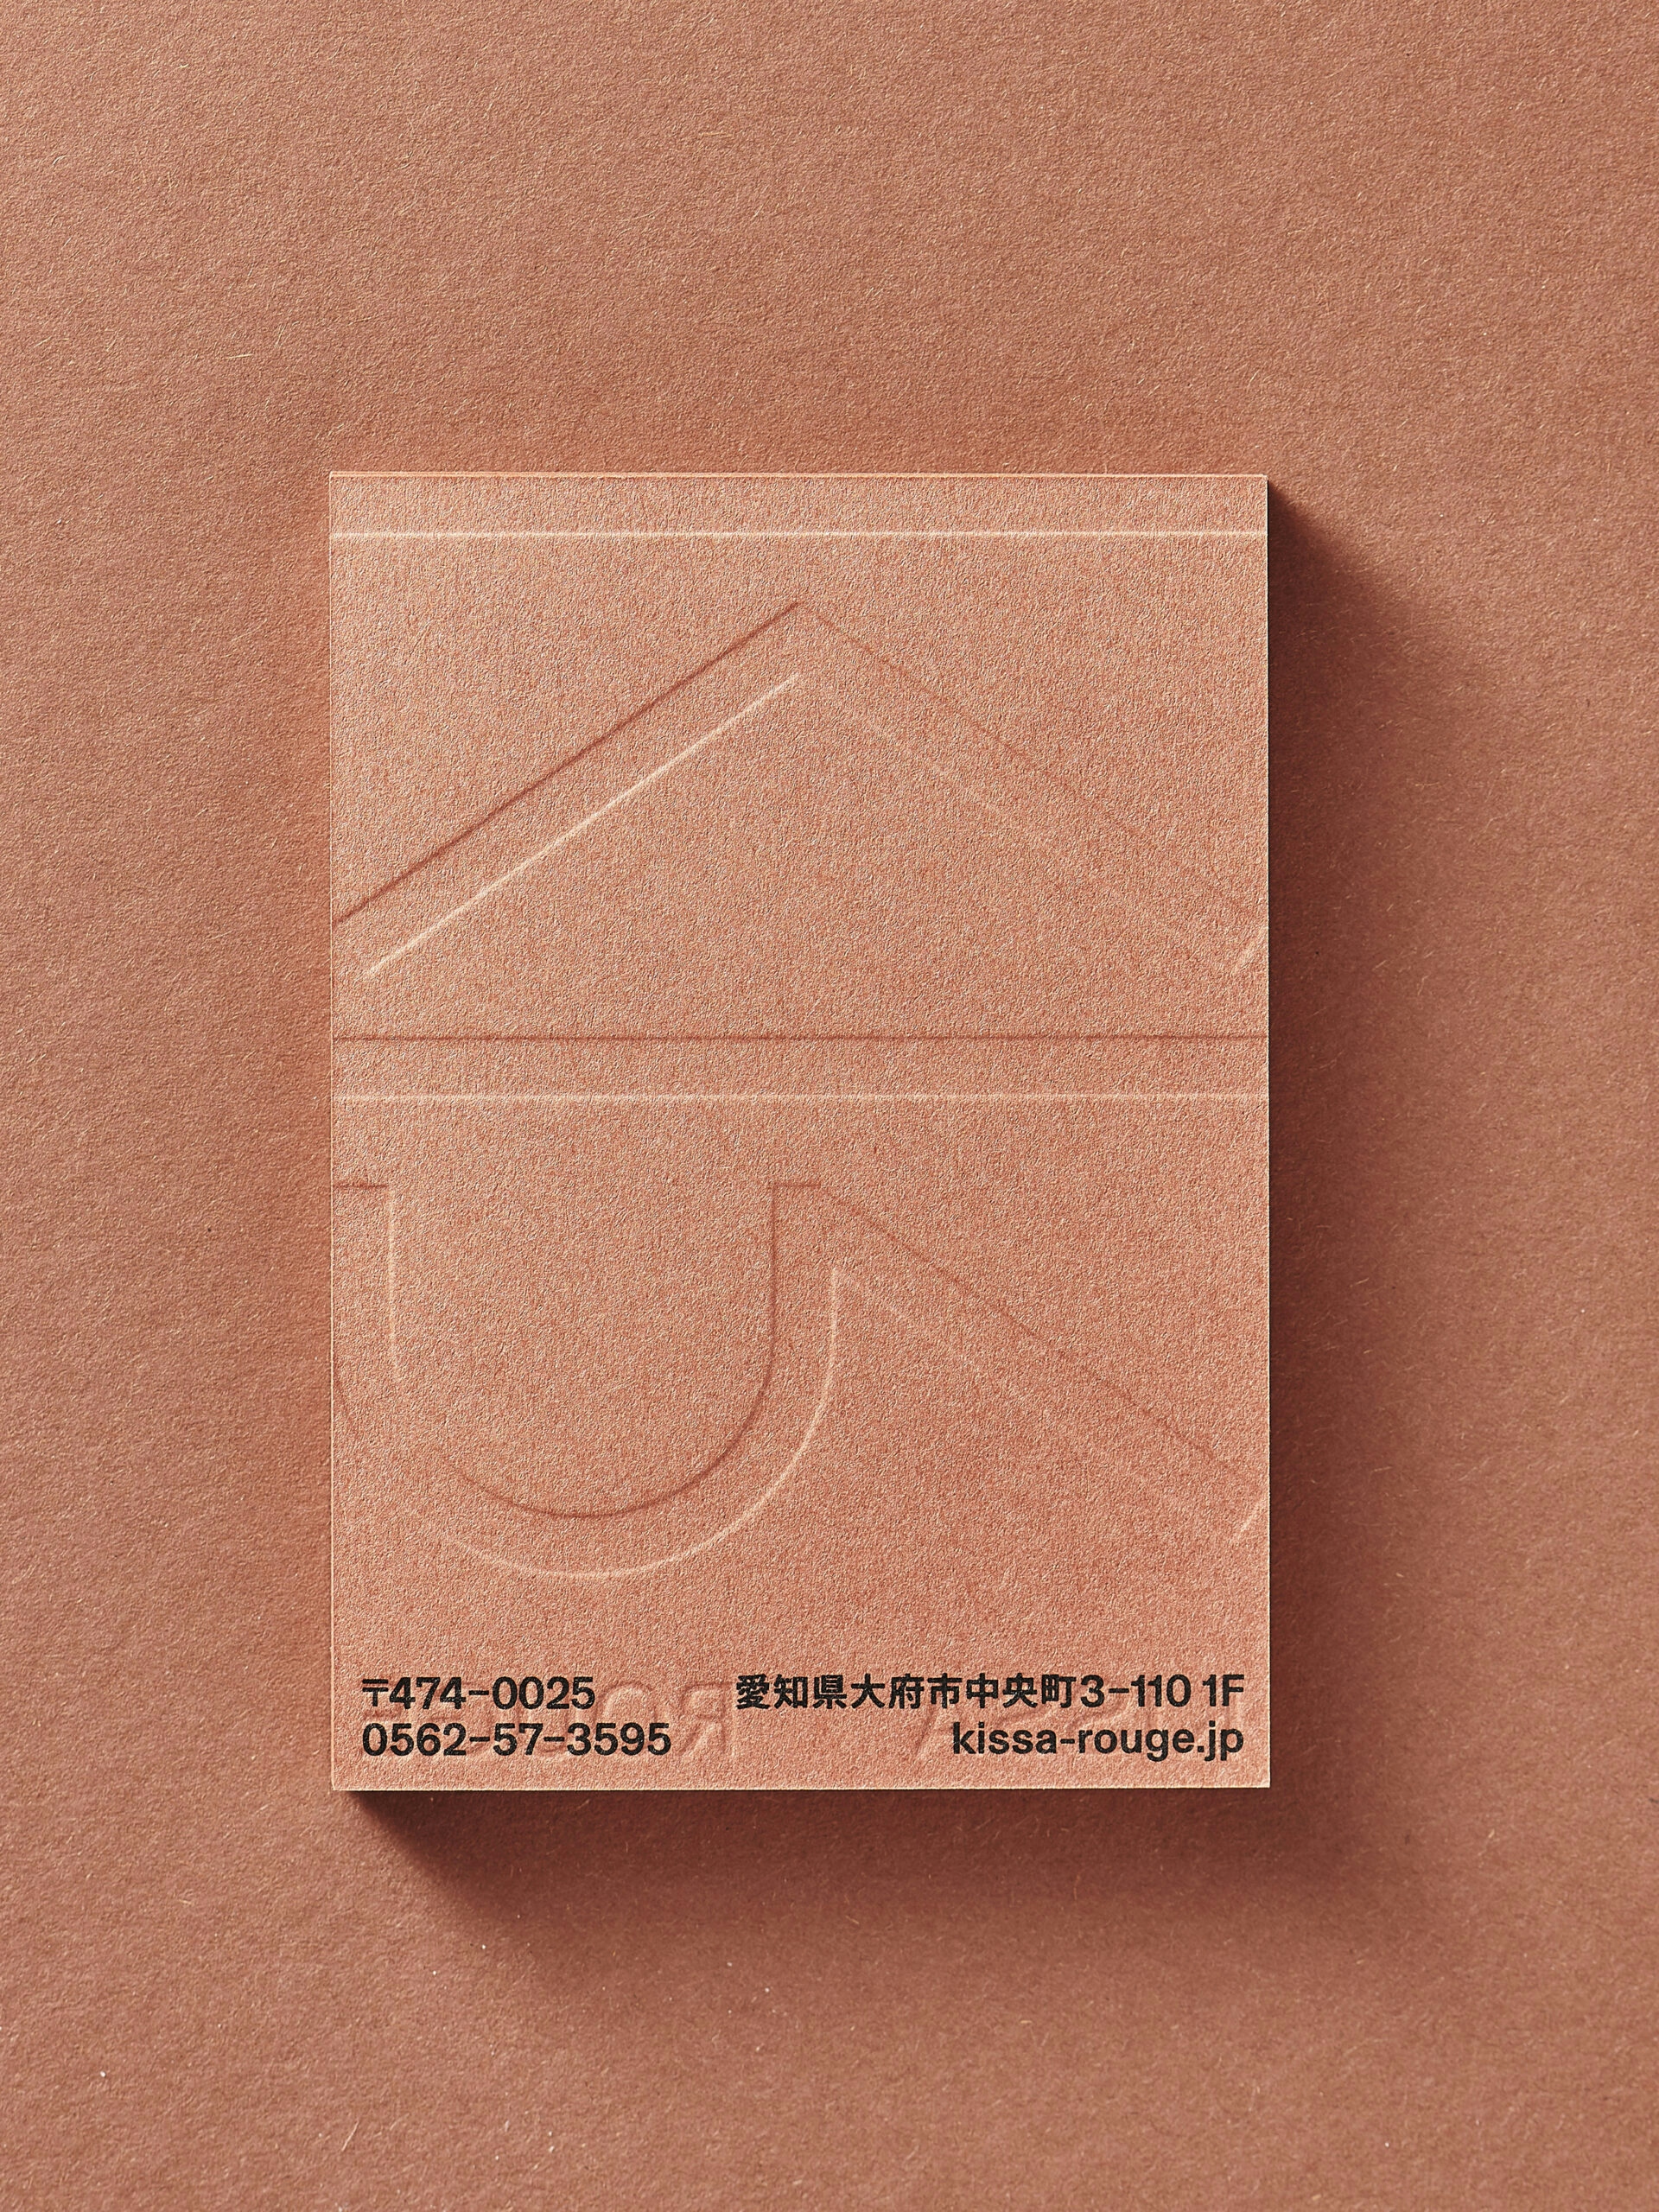 Kissa Rouge shop card front in earthy redish paper with a blind embossing back